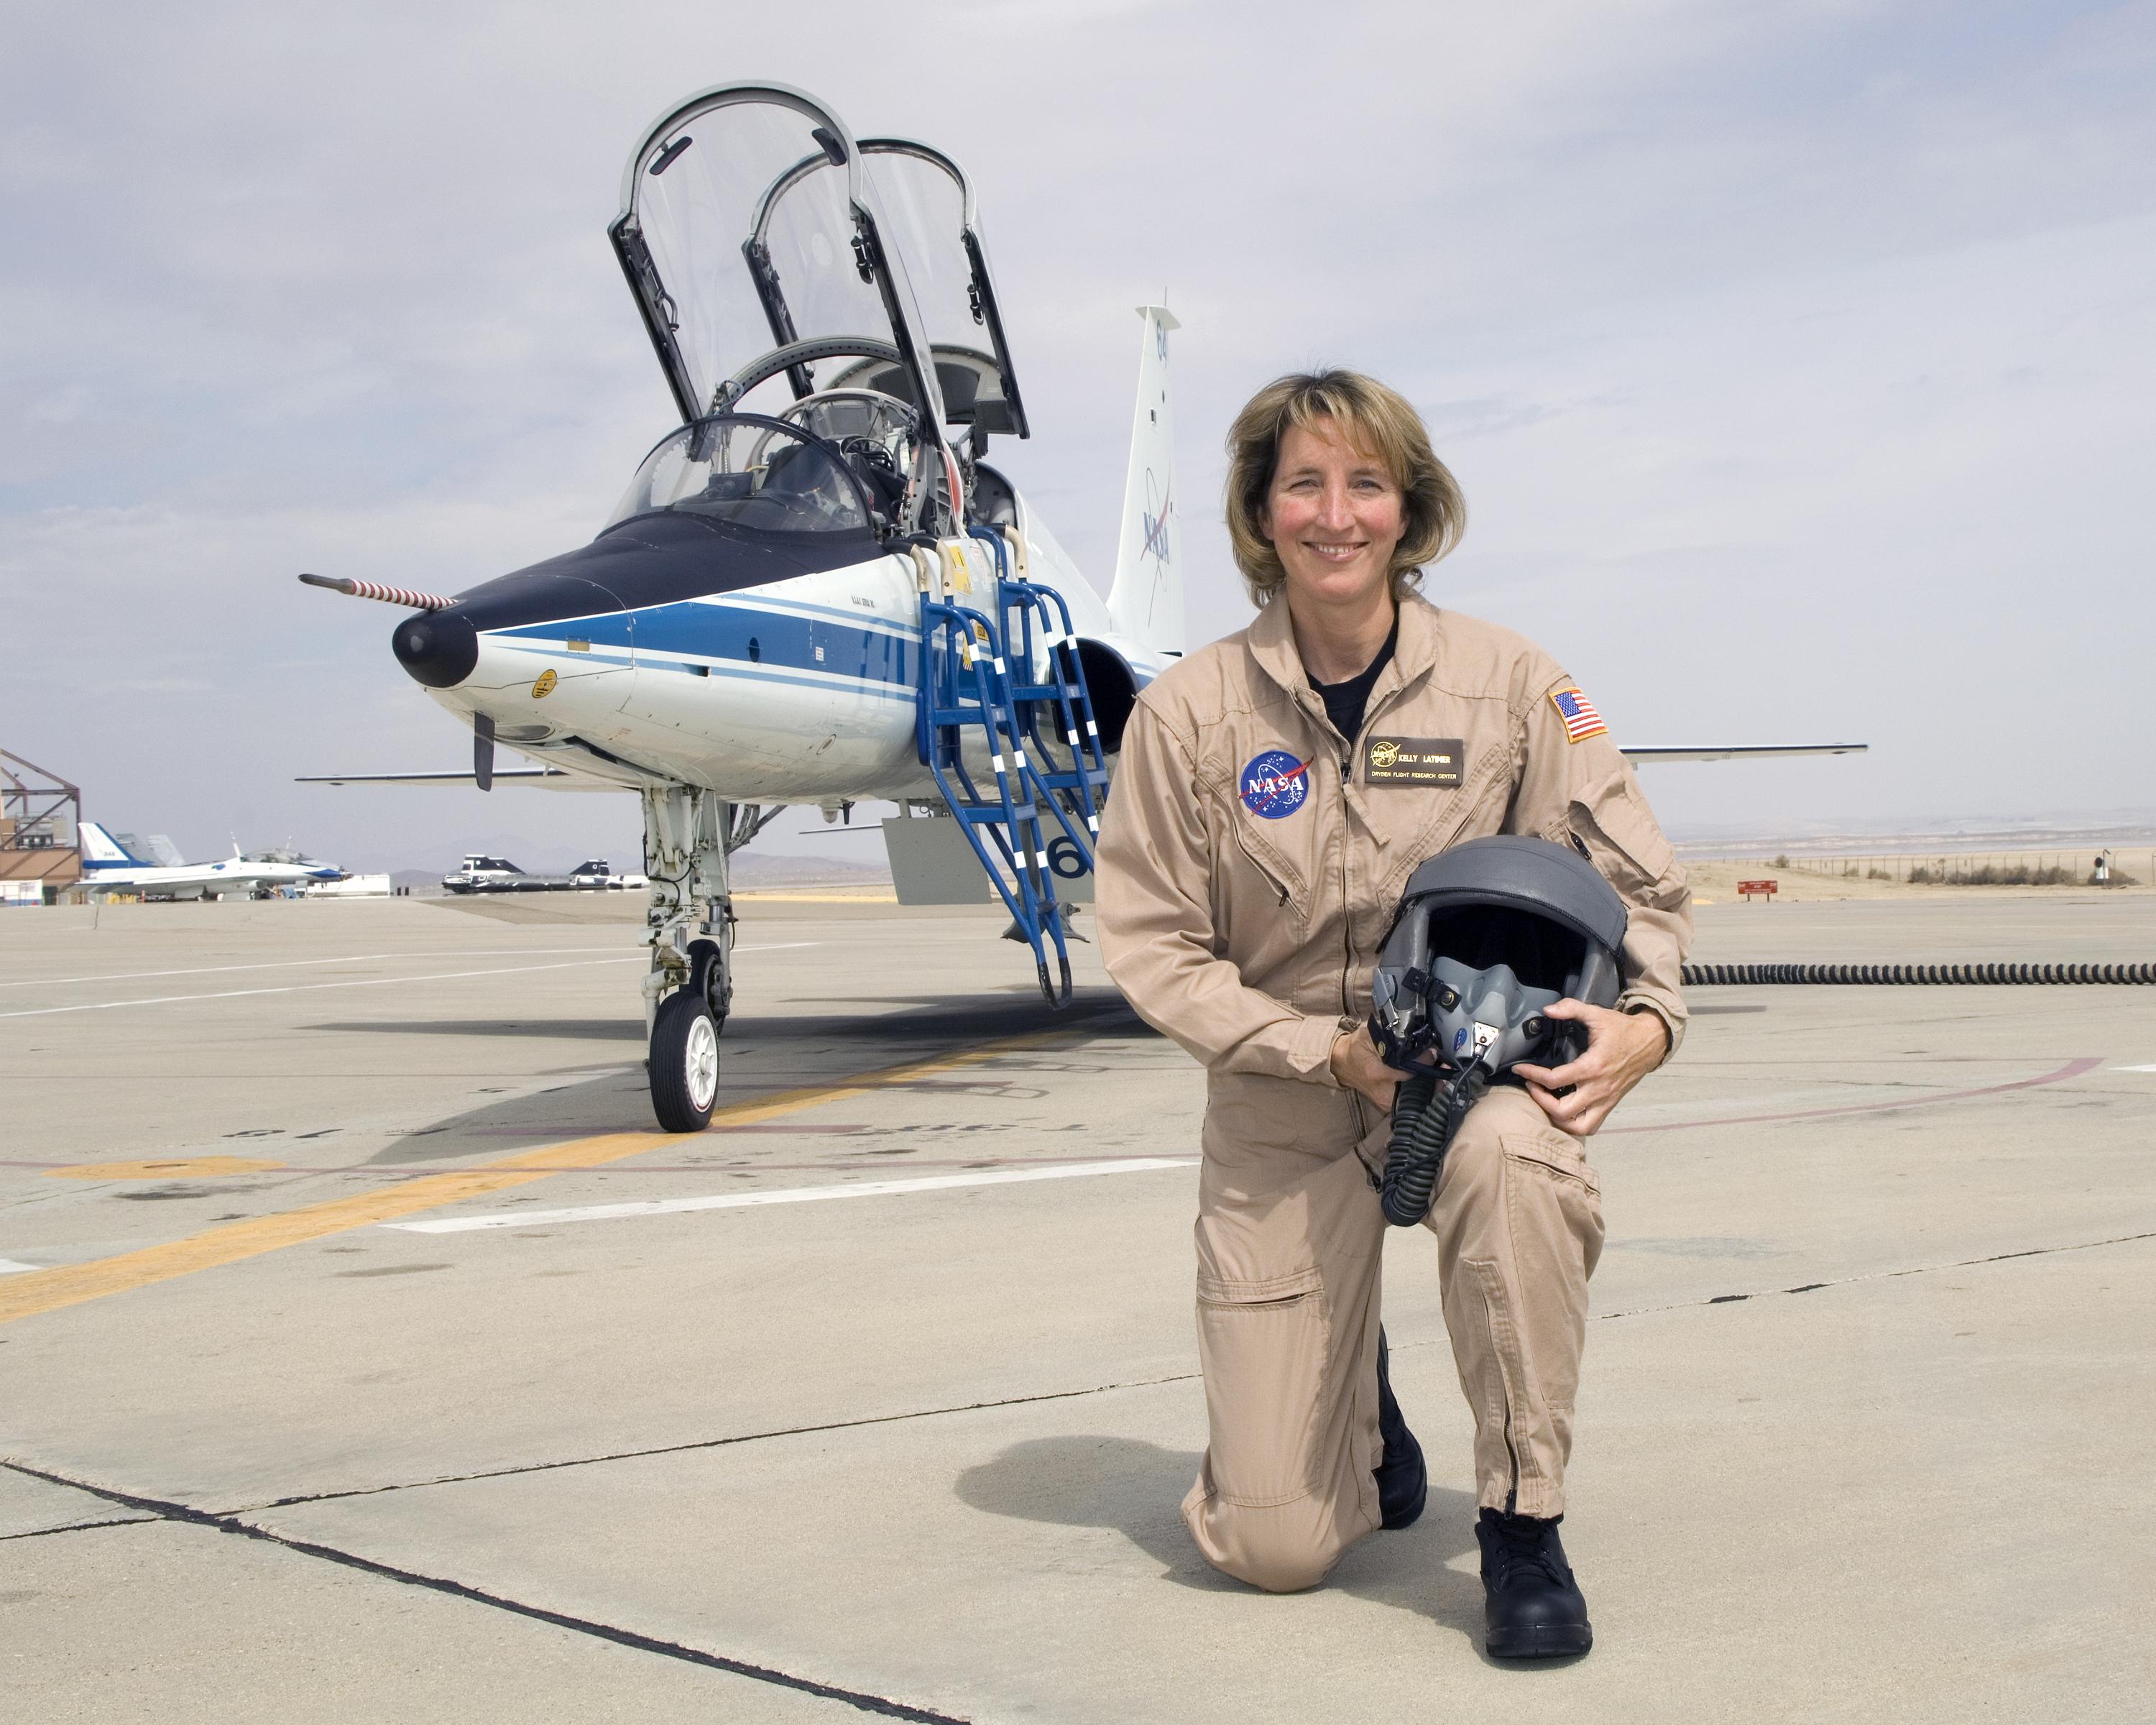 Kelly Latimer: Dryden’s First Female Research Test Pilot